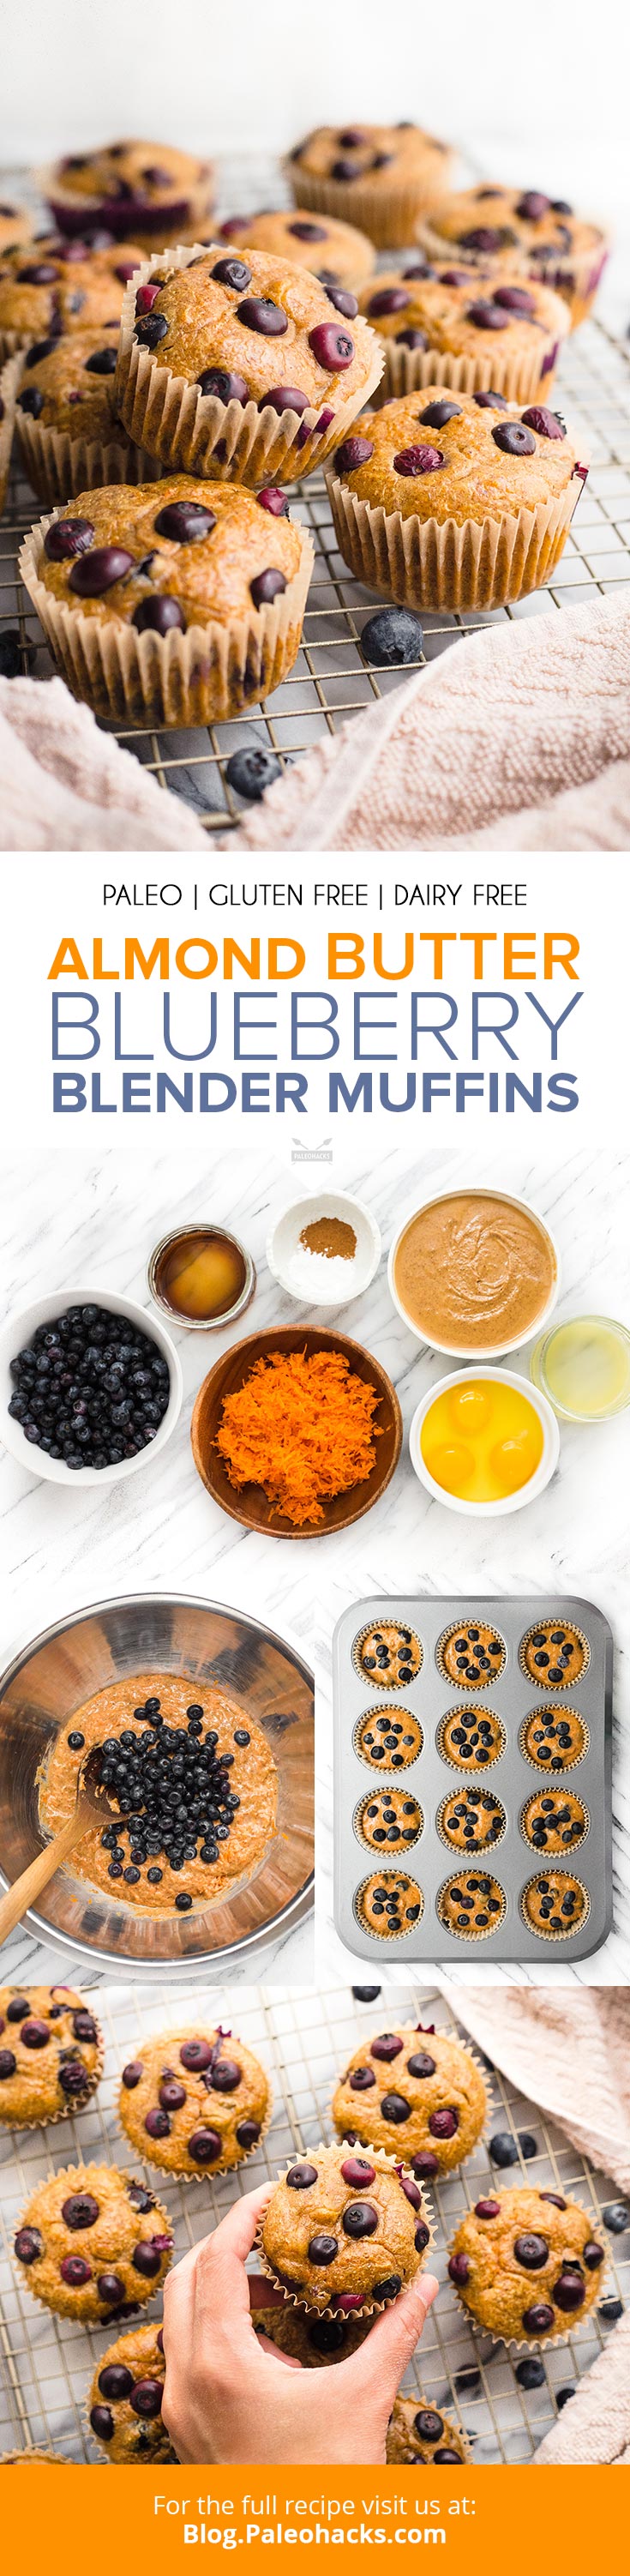 Super easy to make, these heavenly muffins are a healthy way to jumpstart your mornings. Simply place the ingredients into a blender and heat in the oven for 20 minutes.